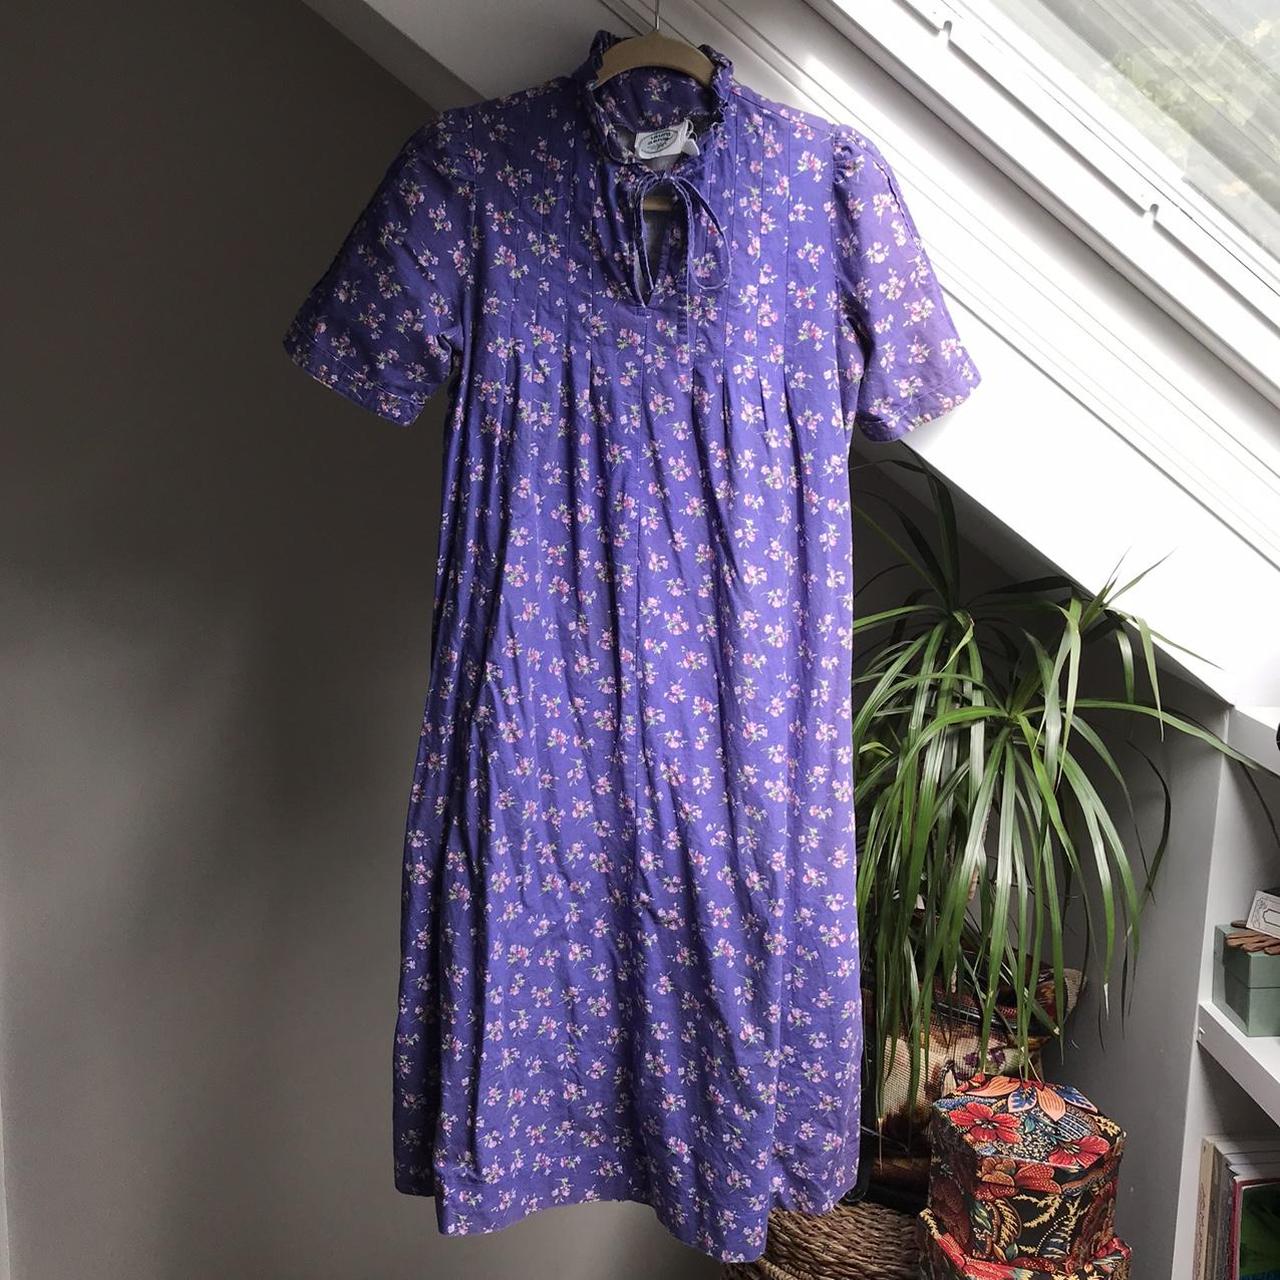 $5 shipping 💐 Vintage Laura Ashley Carno Wales 1970s... - Depop